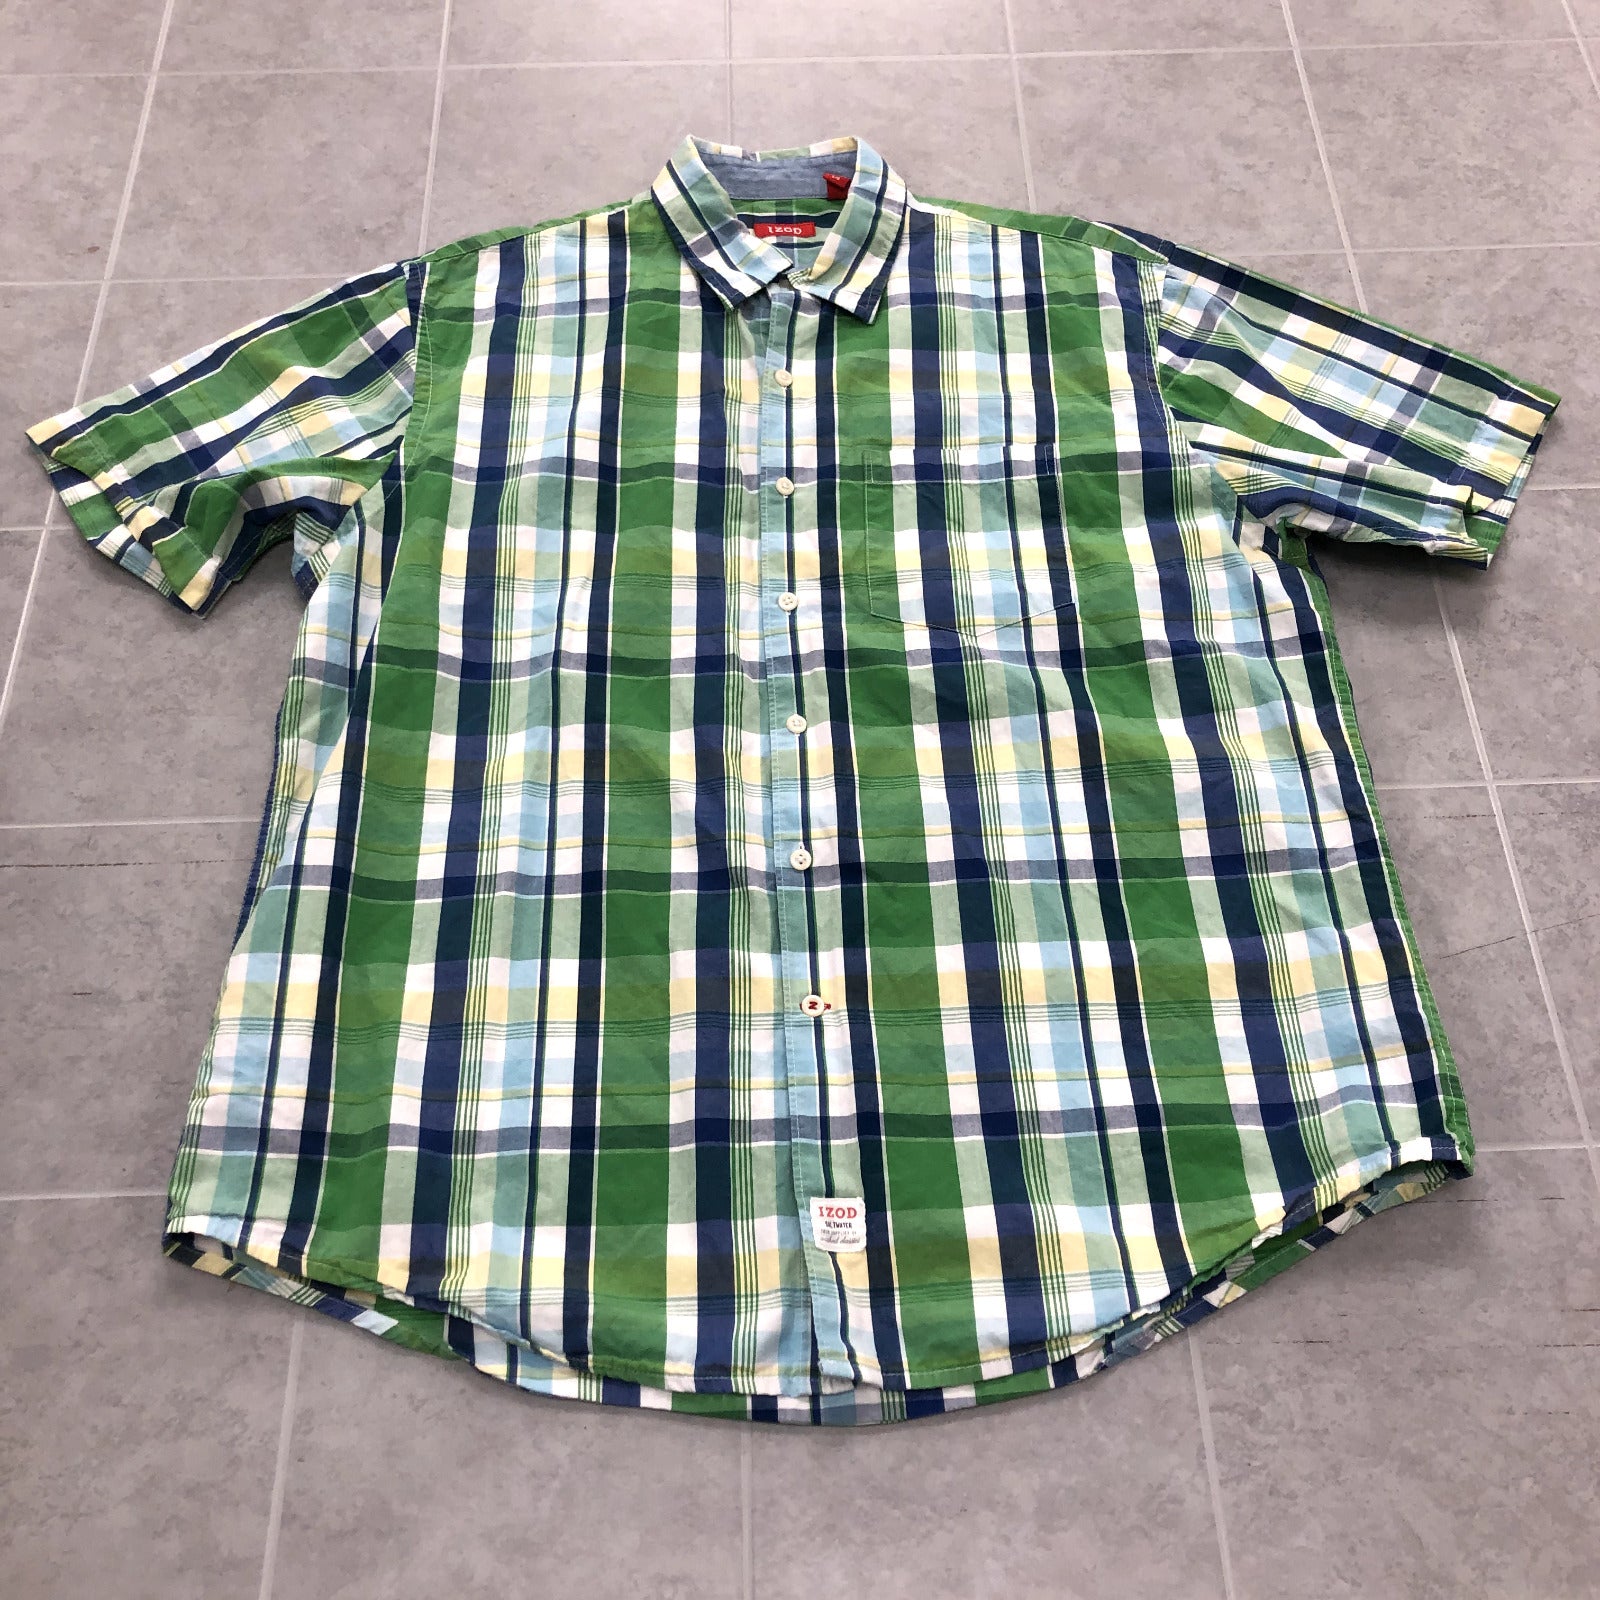 IZOD Green Plaid Short Sleeve Casual Collared Button Up Shirt Adult Size L